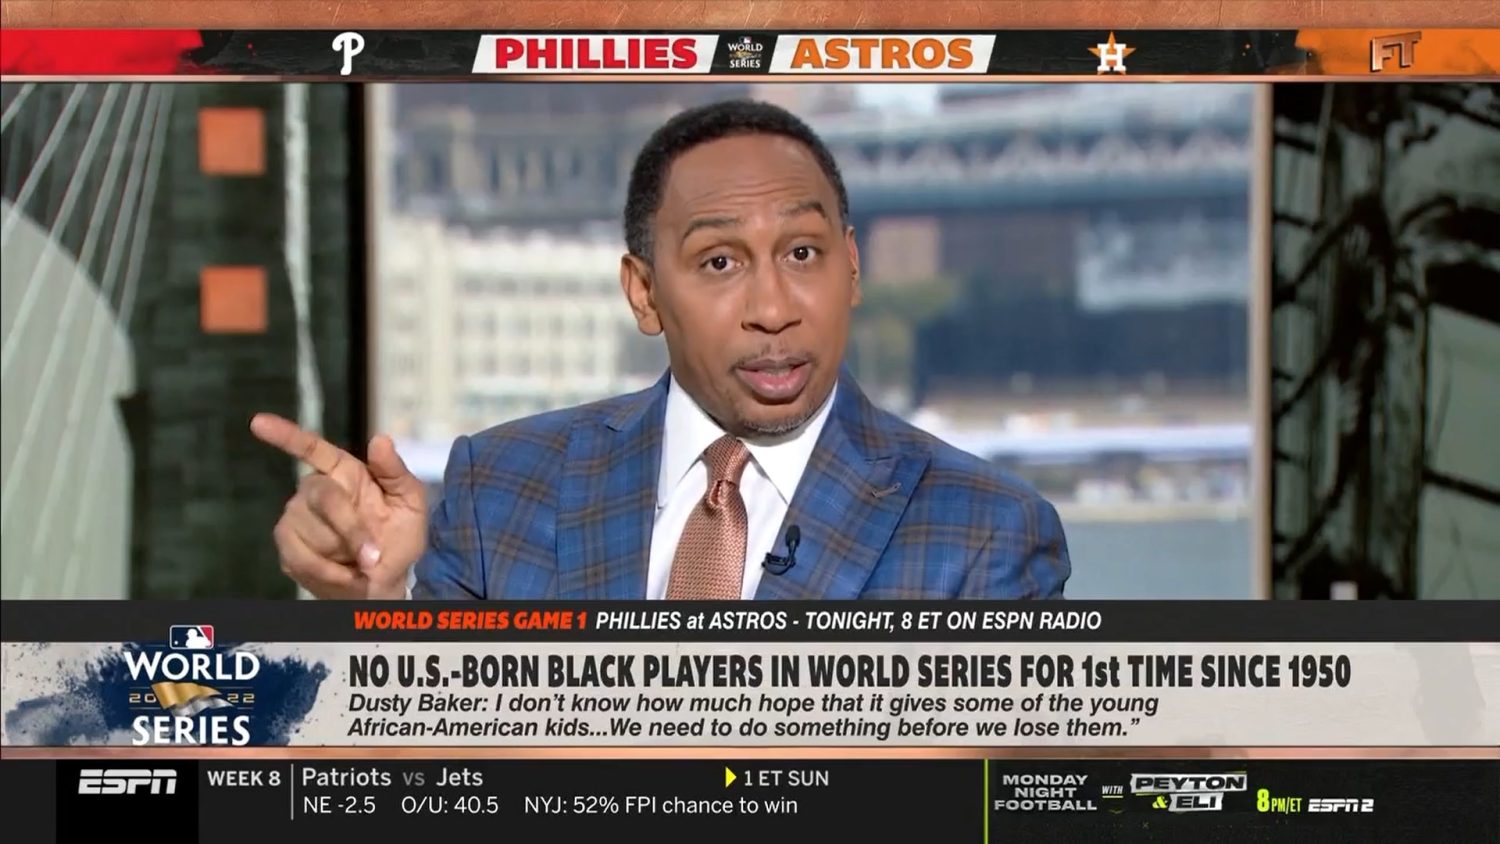 Stephen A. Smith boldly declared he's 'underpaid' by ESPN